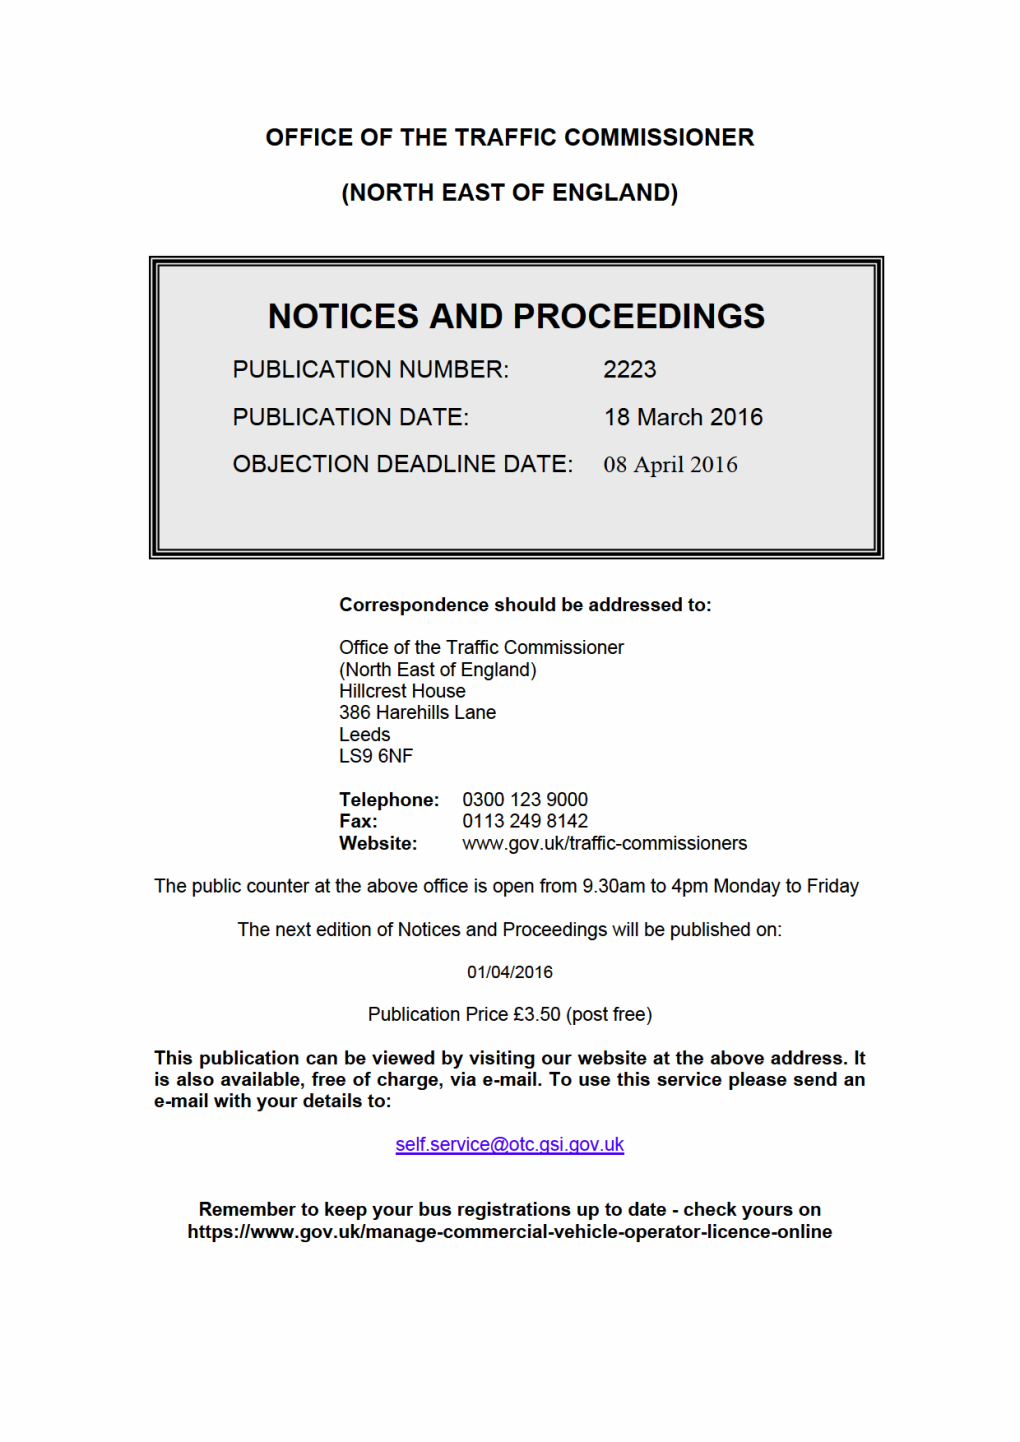 NOTICES and PROCEEDINGS 18 March 2016